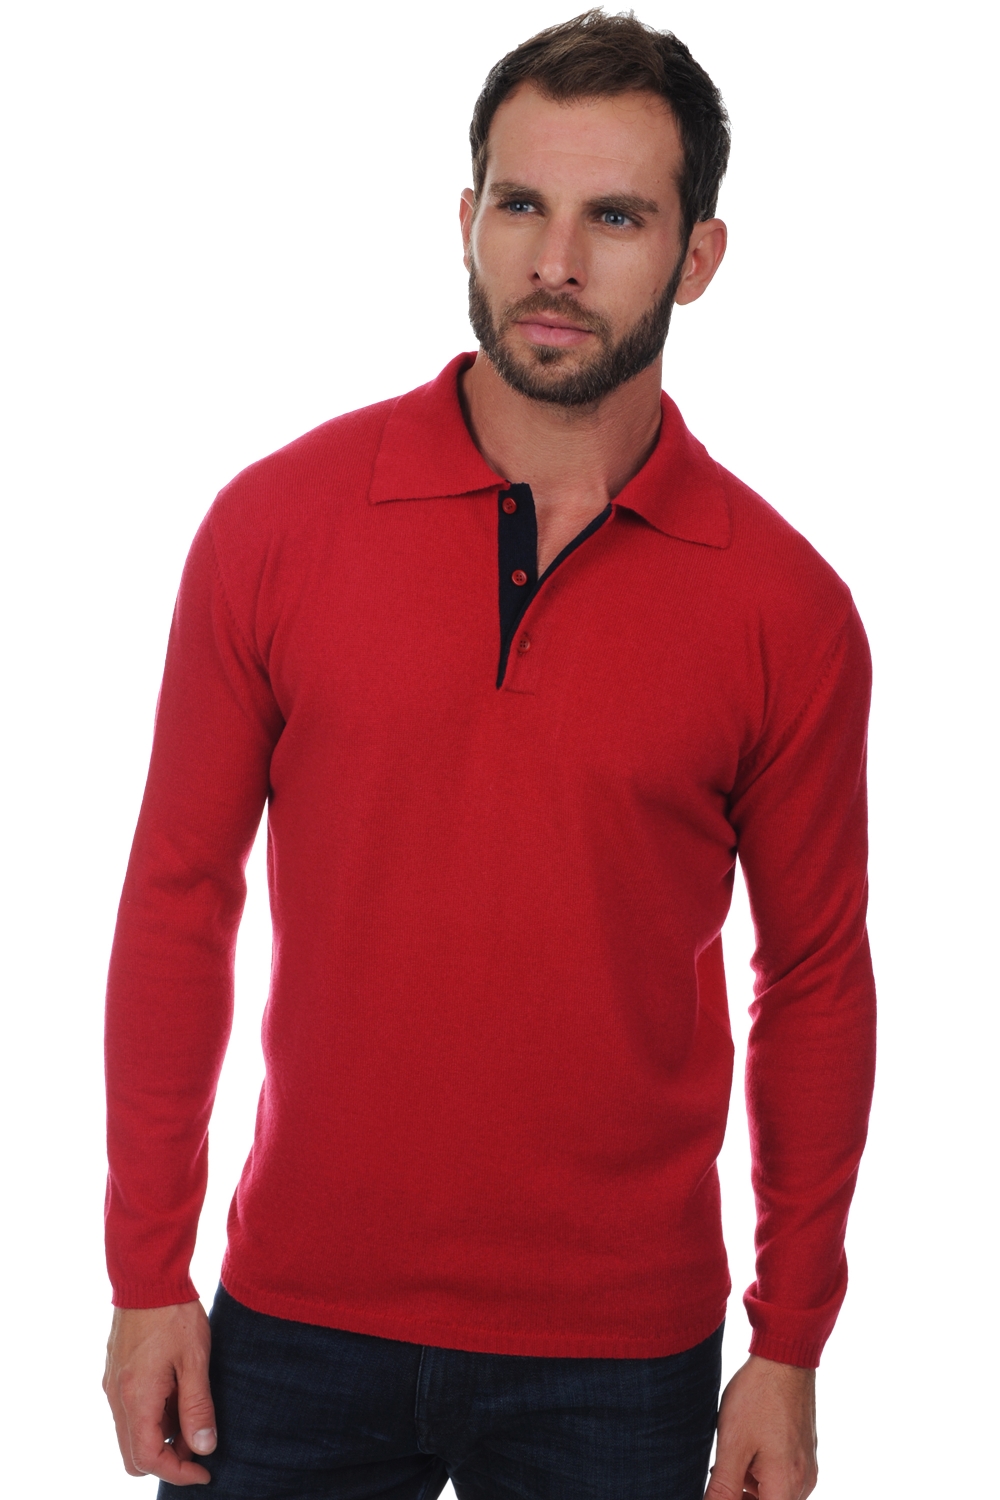 Cashmere men polo style sweaters scott blood red dark navy s